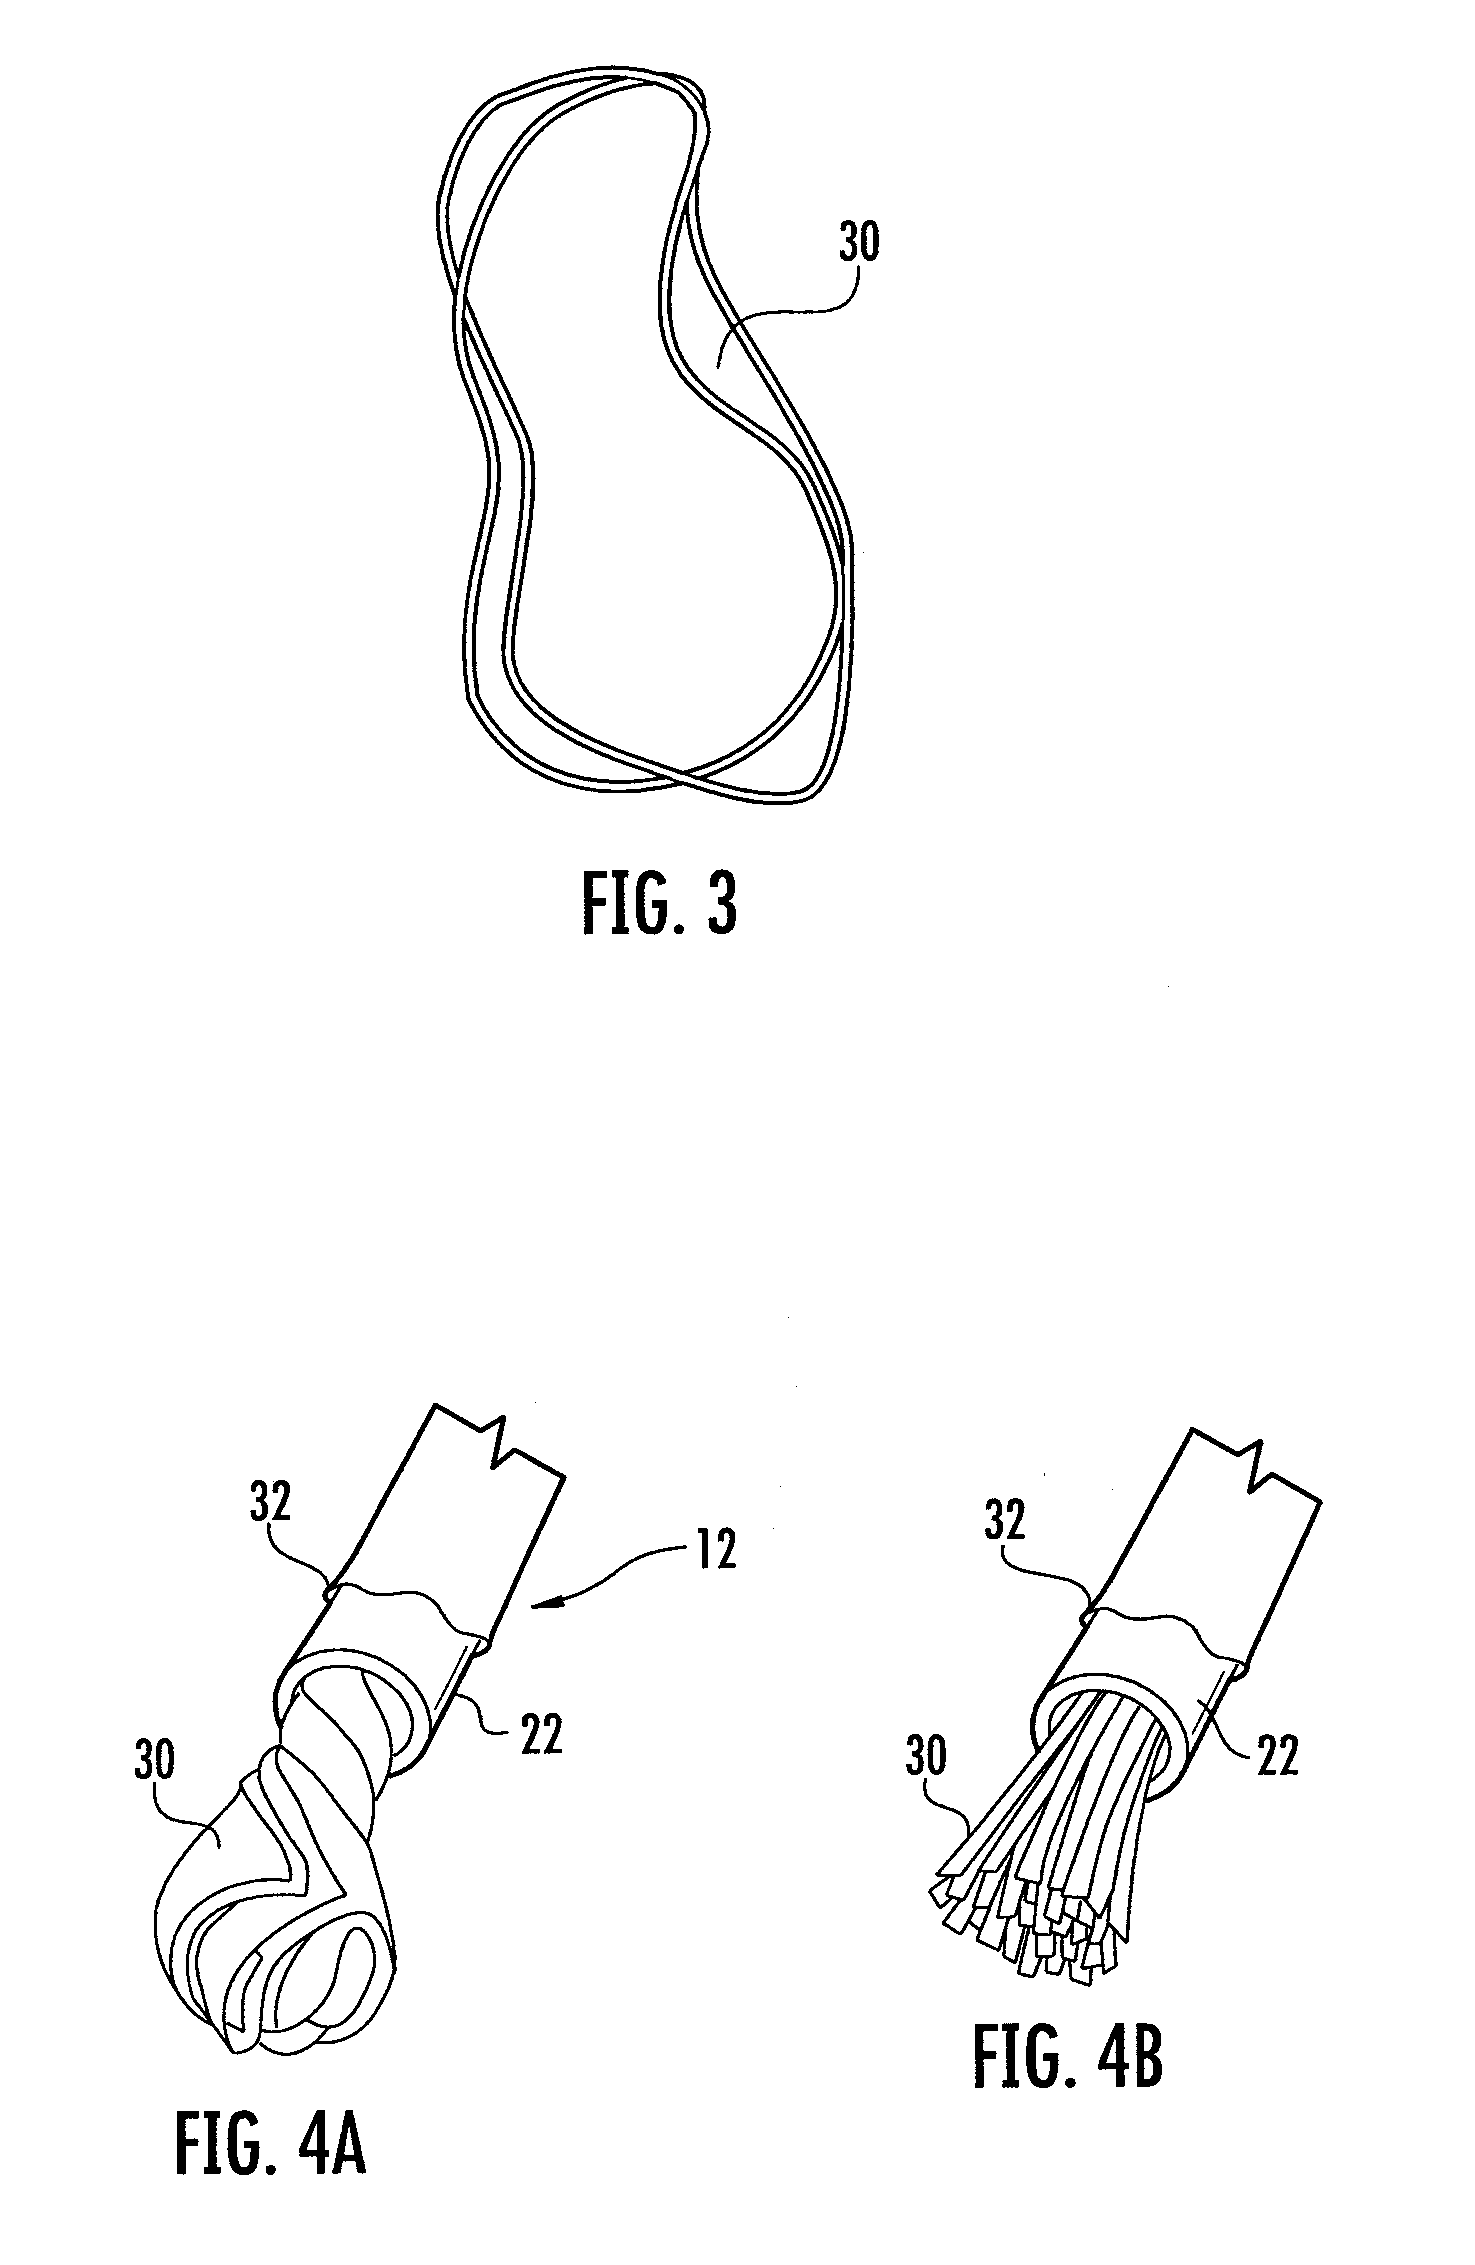 Multiple Layered Resistance Cables With Built In Resistance Handles And Interchangeable Hand Grips With Attachments